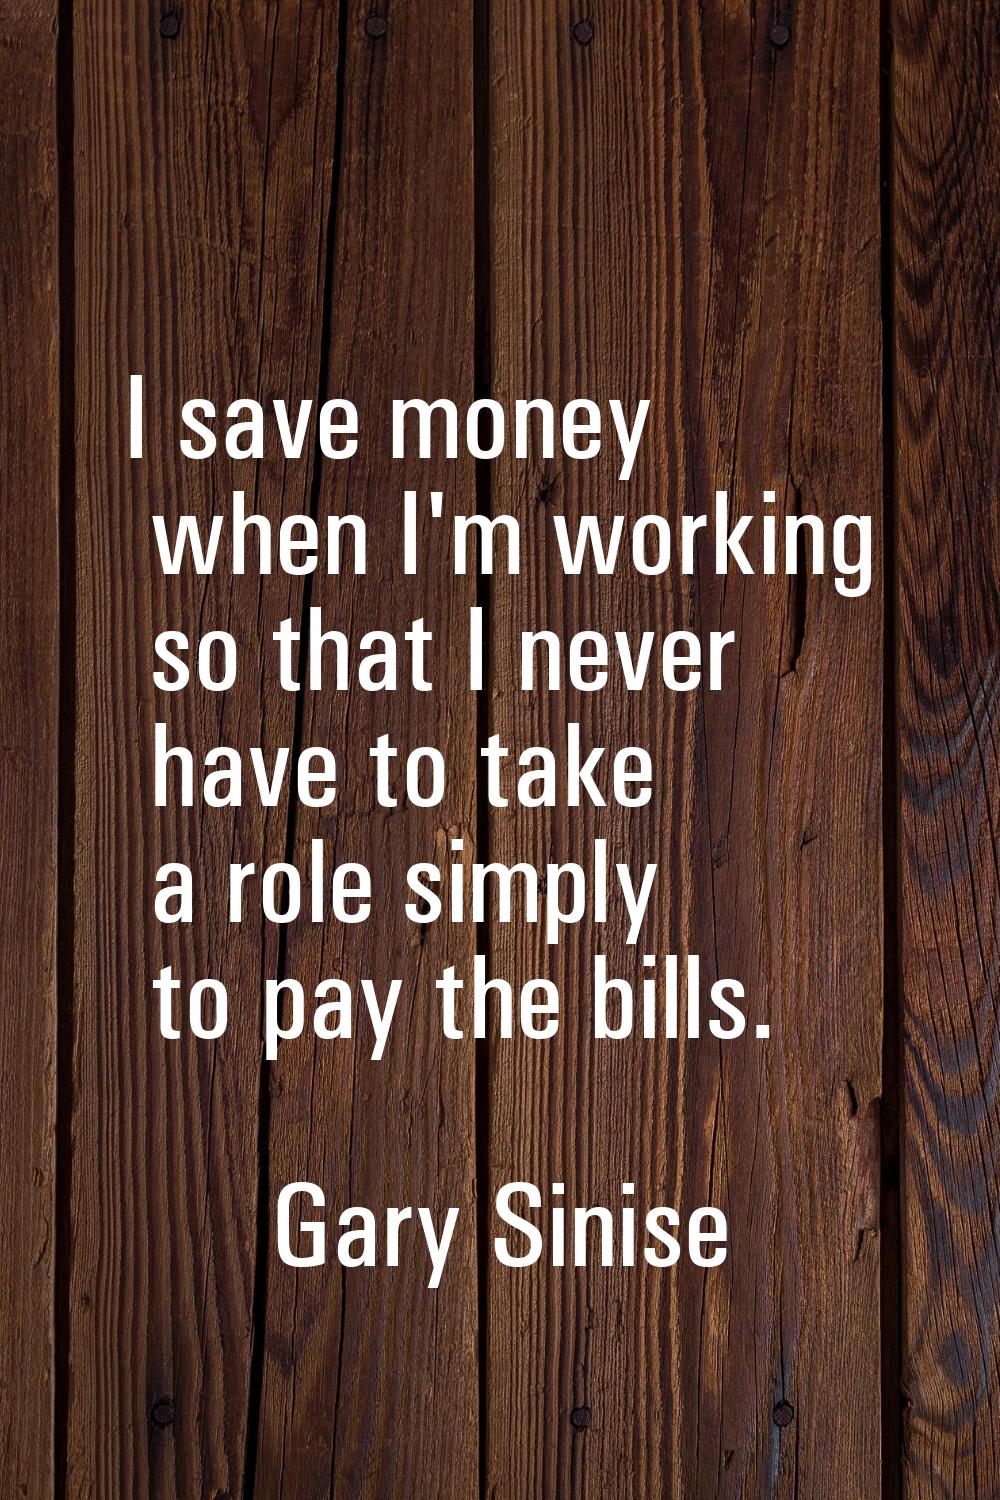 I save money when I'm working so that I never have to take a role simply to pay the bills.